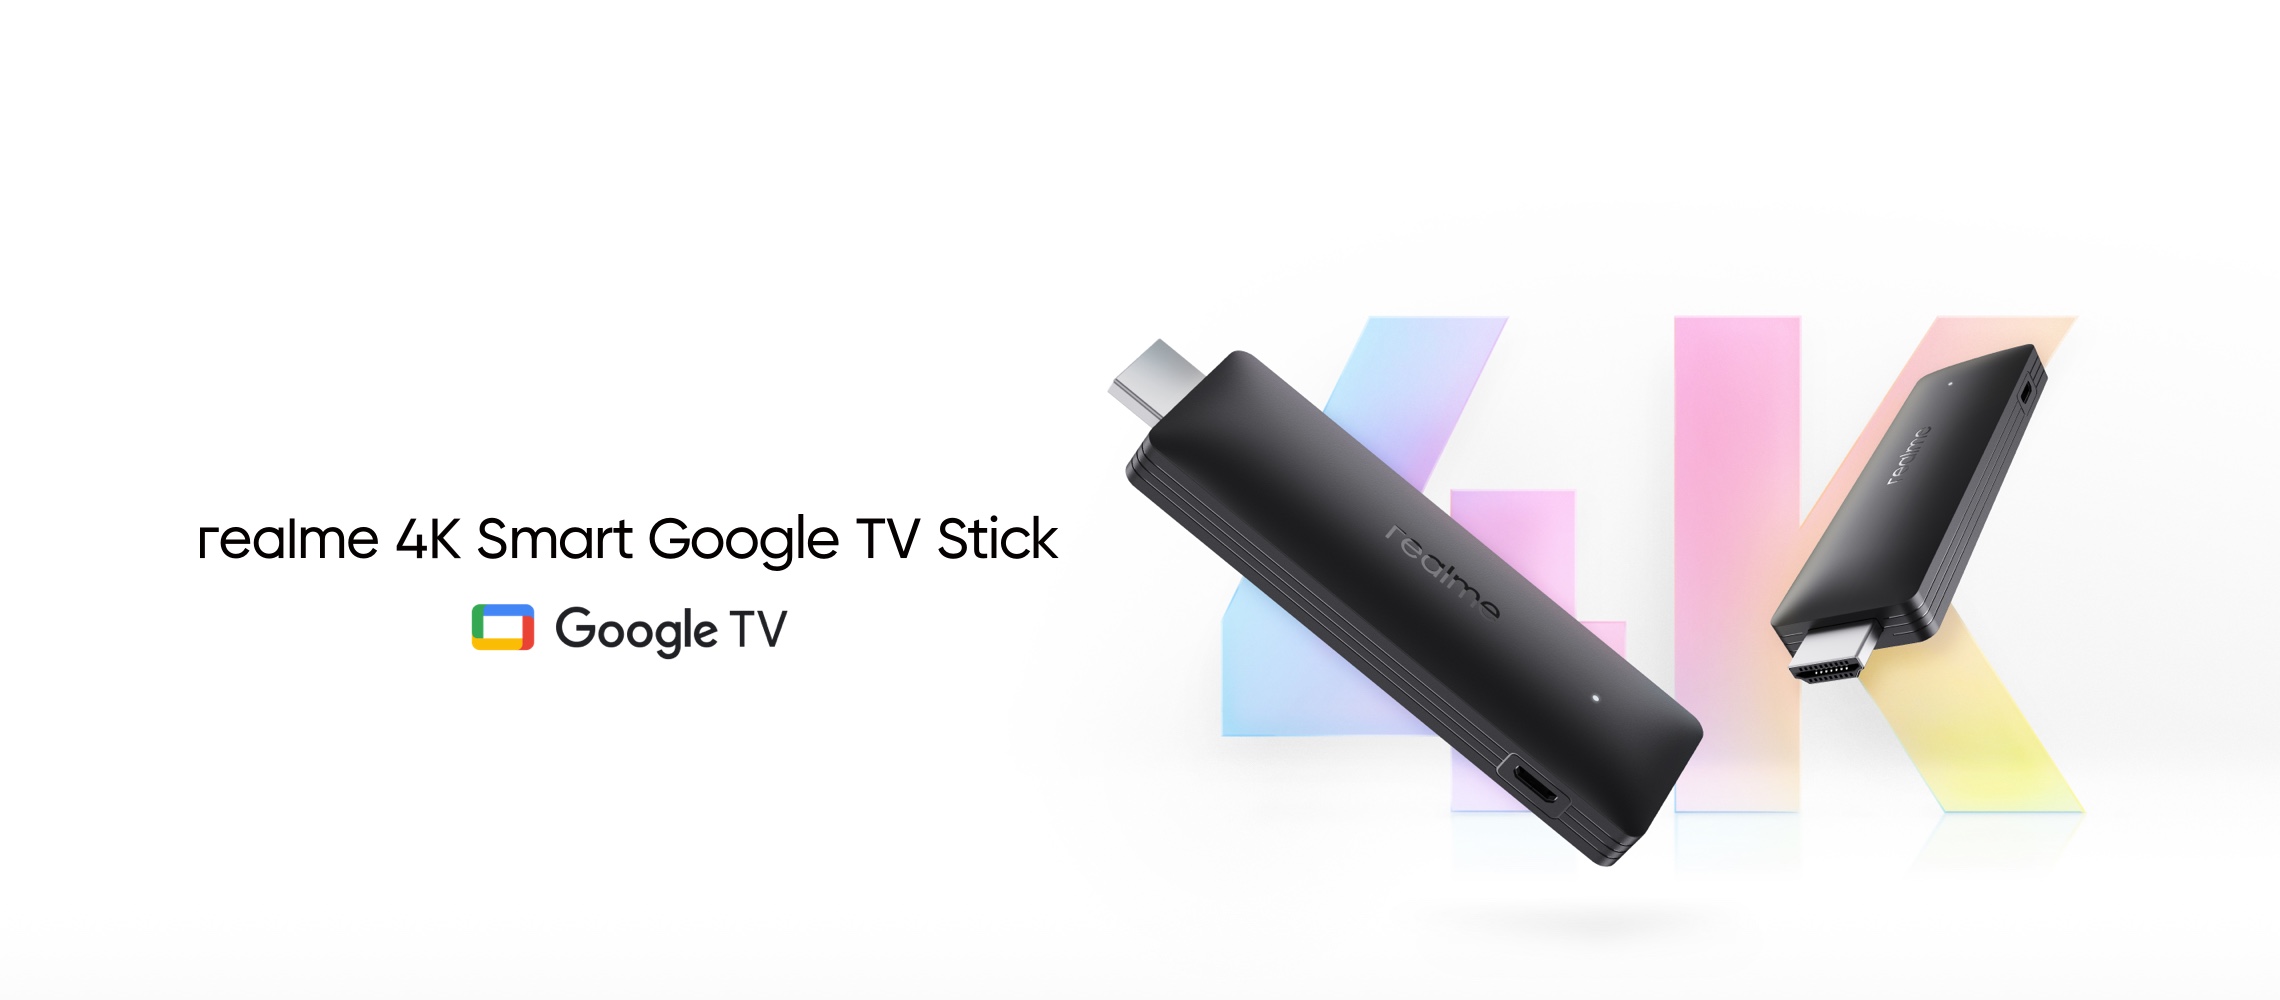 Realme 4K Smart Google TV Stick: Stick-like set-top box with 2GB of RAM, quad-core chip and Google TV on board for $53